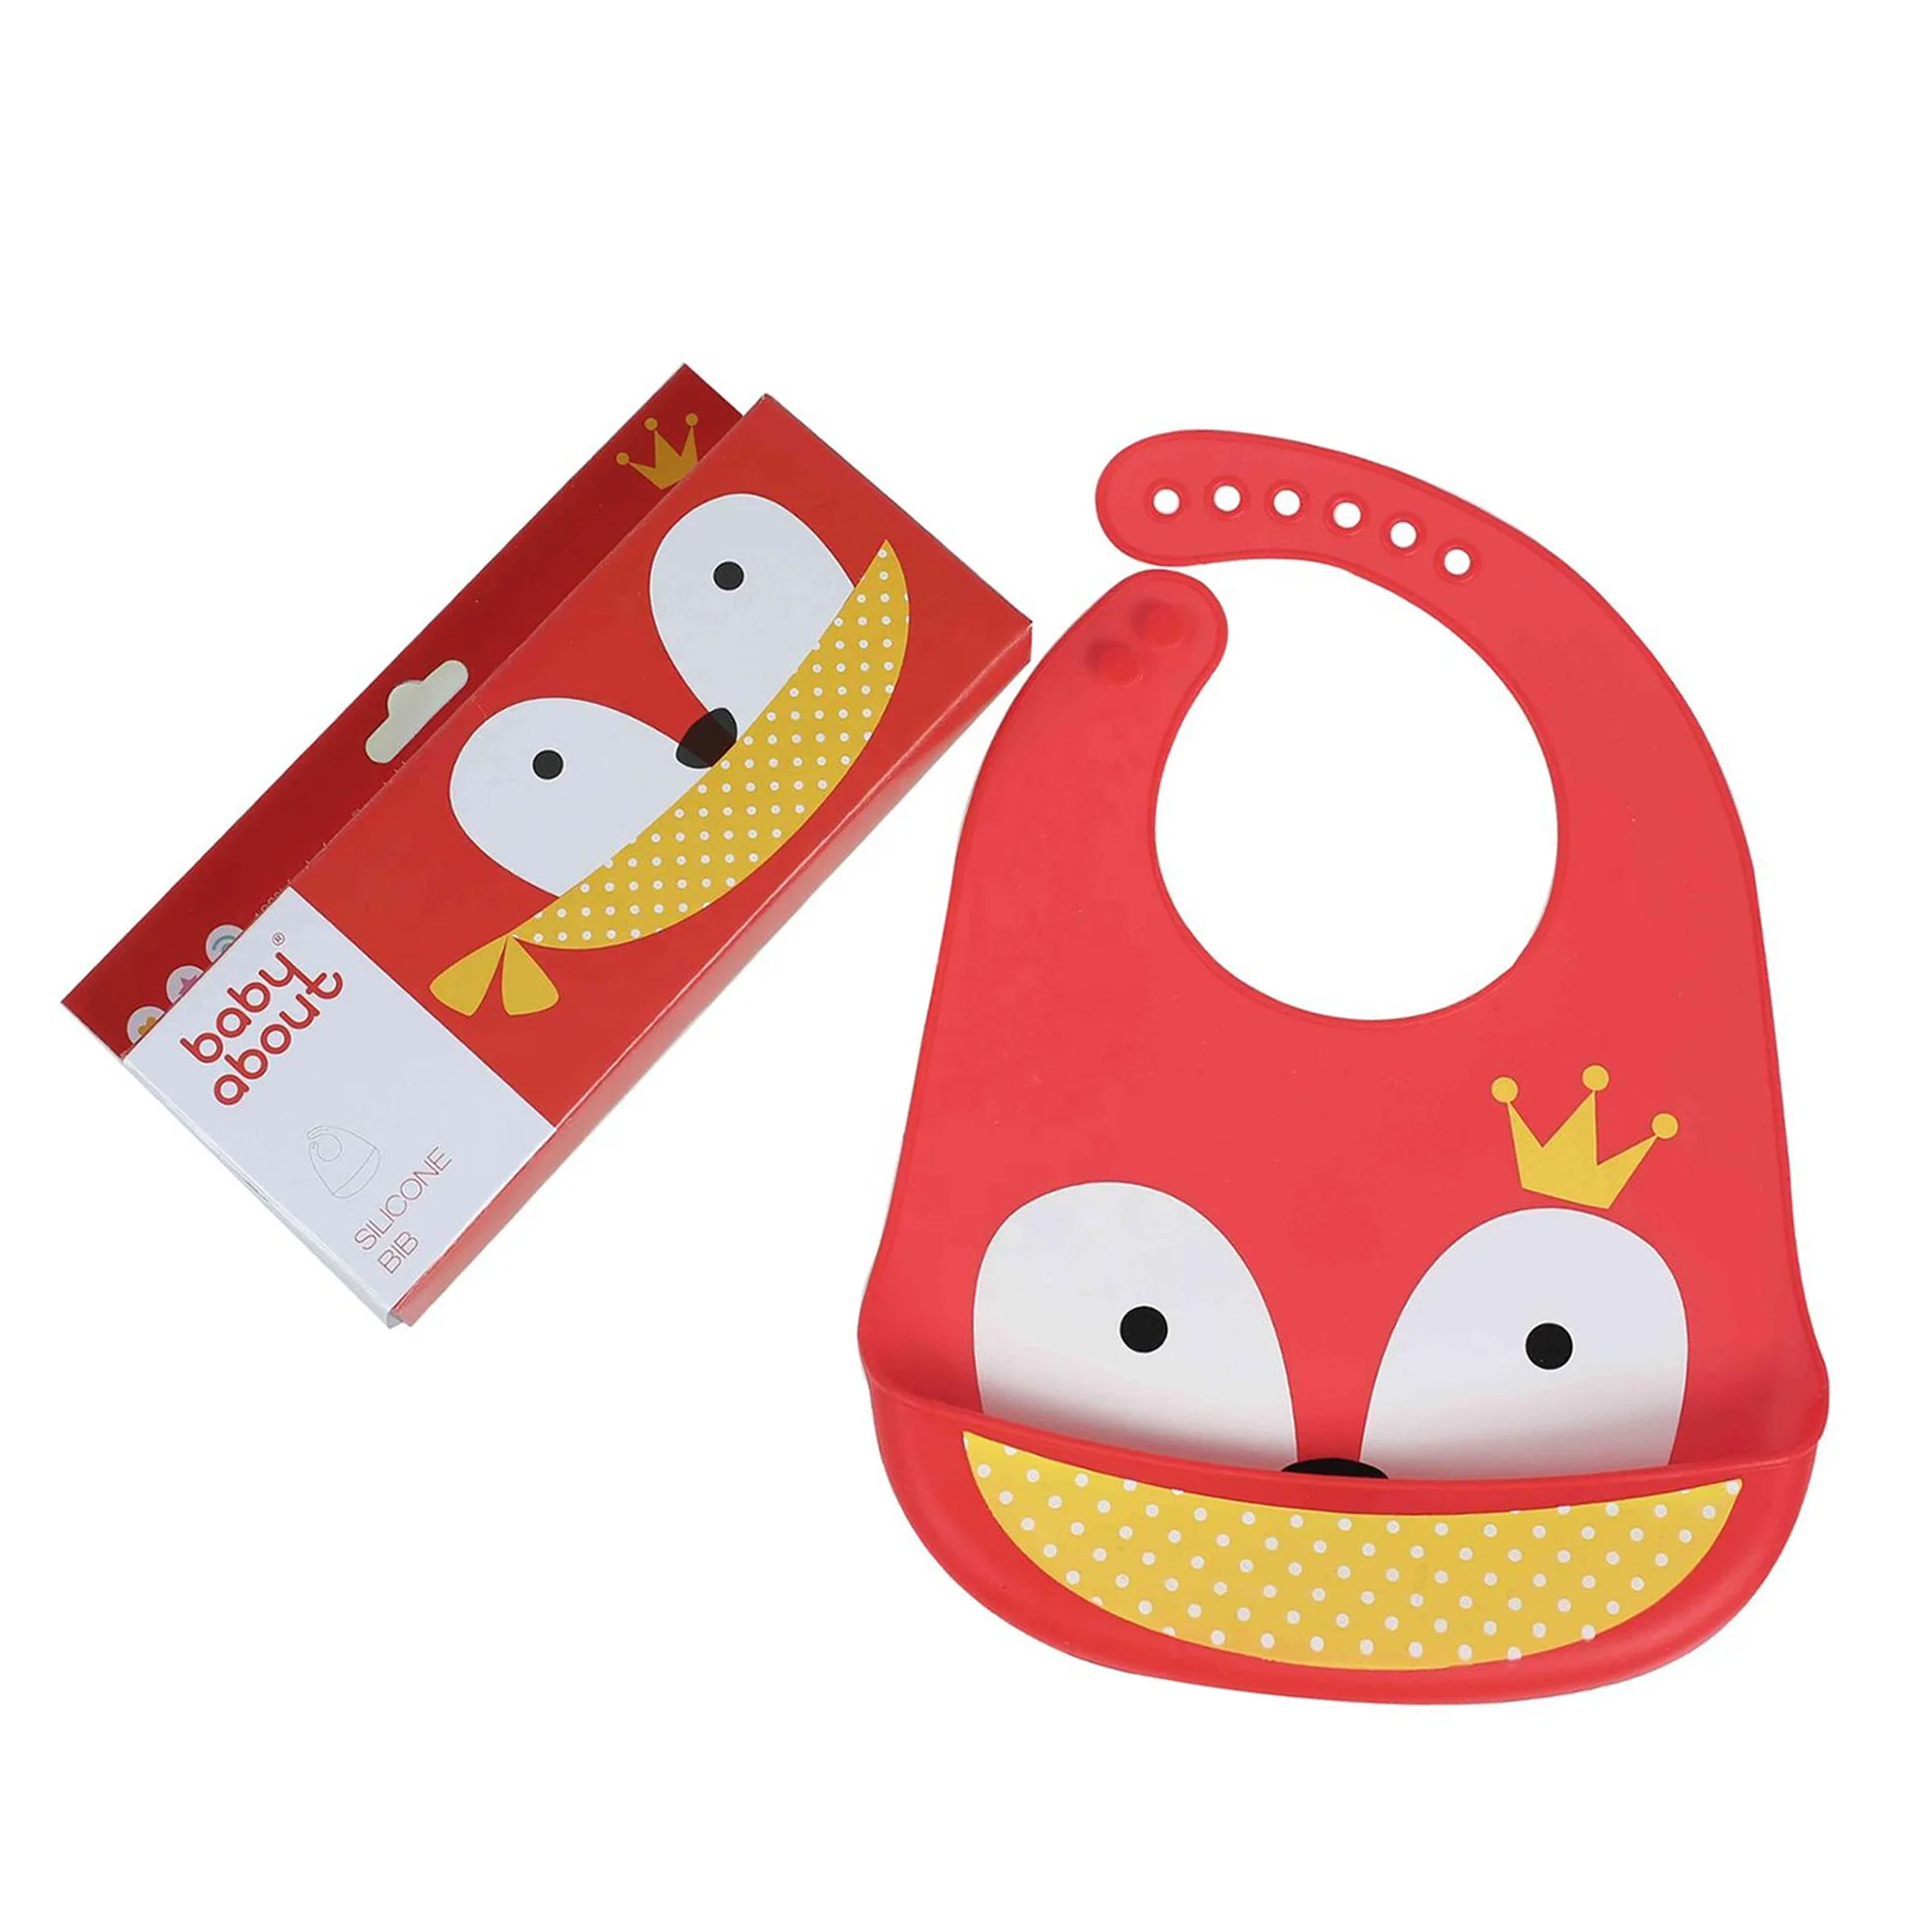 

Best Choose Kids Toddlers Silicone Bibs Adorable Children Grade Soft Waterproof Big Pocket Silicone Baby Bib, Multiful color